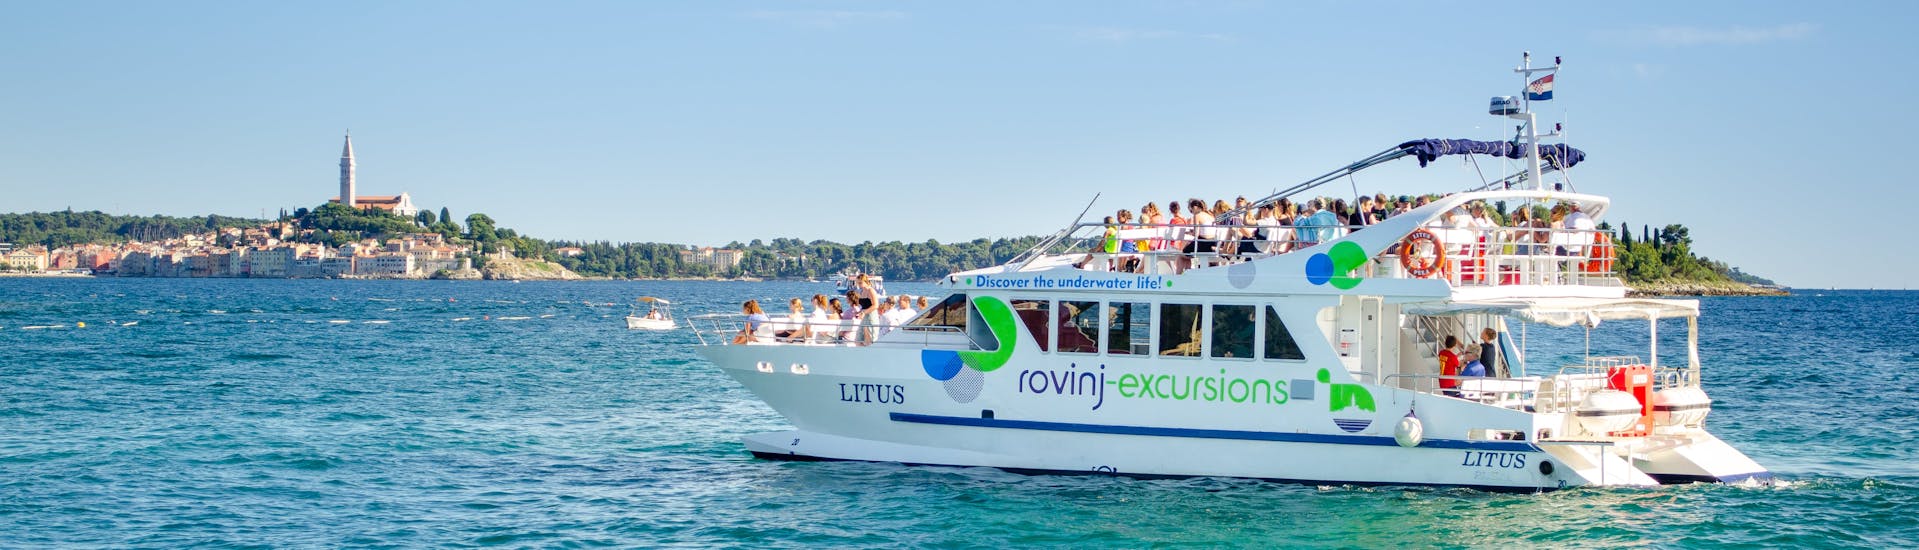 The boat LITUS in the crystal- clear water of Istria during the Sunset Catamaran Trip around Rovinj with Dolphin watching with Rovinj Excursions.